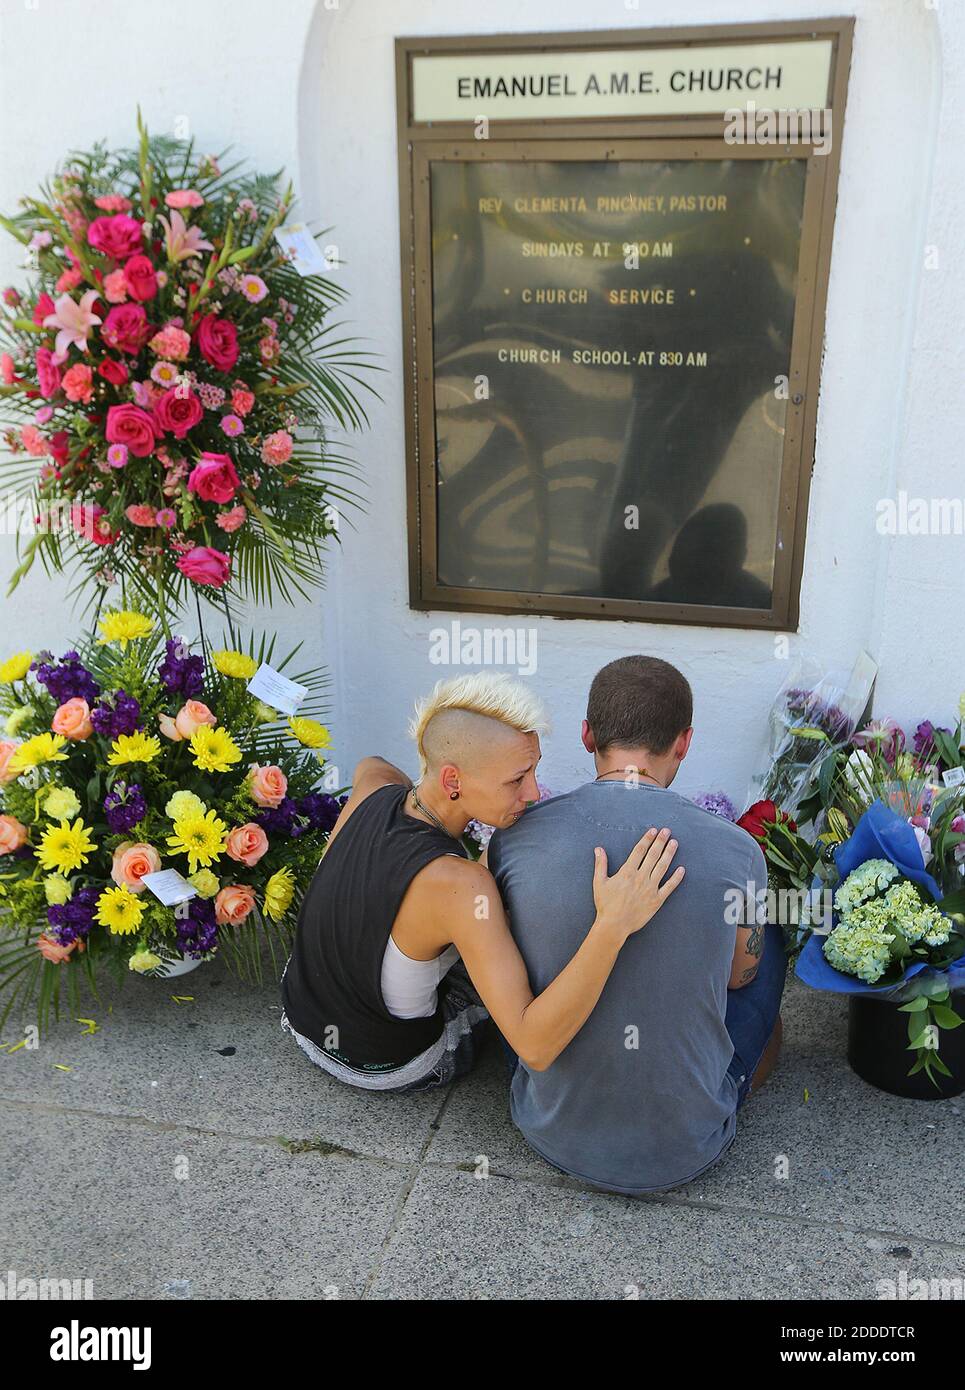 NO FILM, NO VIDEO, NO TV, NO DOCUMENTARY - Ashley Edge, left, and Brad Hutchinson, from Charleston, grieve at the memorial in front of the Emanuel AME Church where 9 people were killed including the pastor on Thursday, June 18, 2015, in Charleston, SC, USA. Photo by Curtis Compton/Atlanta Journal-Constitution/TNS/ABACAPRESS.COM Stock Photo